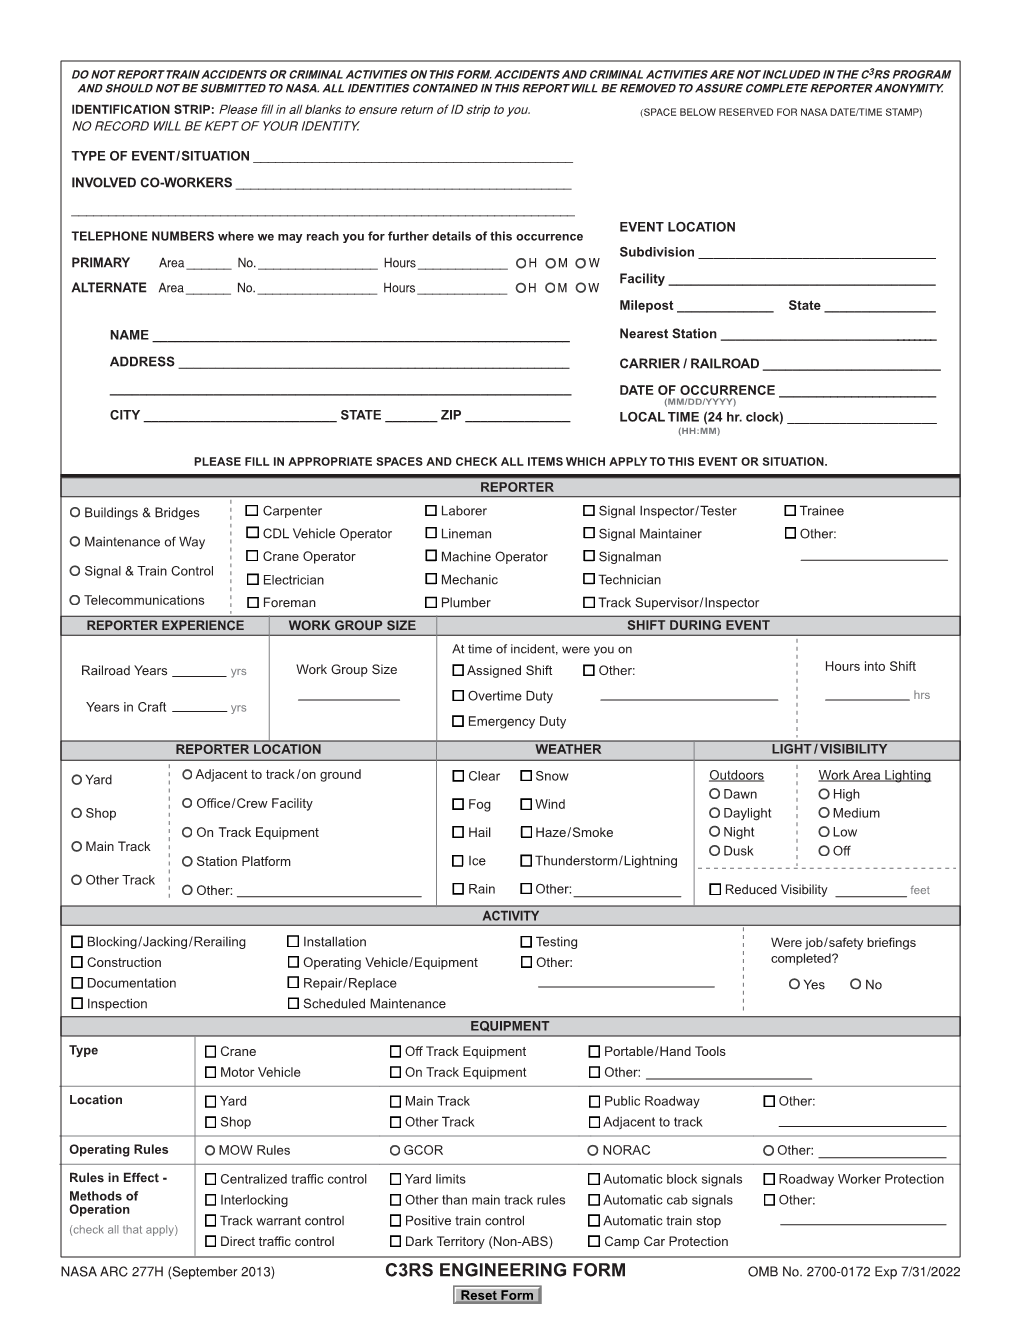 C3RS Engineering Report Form